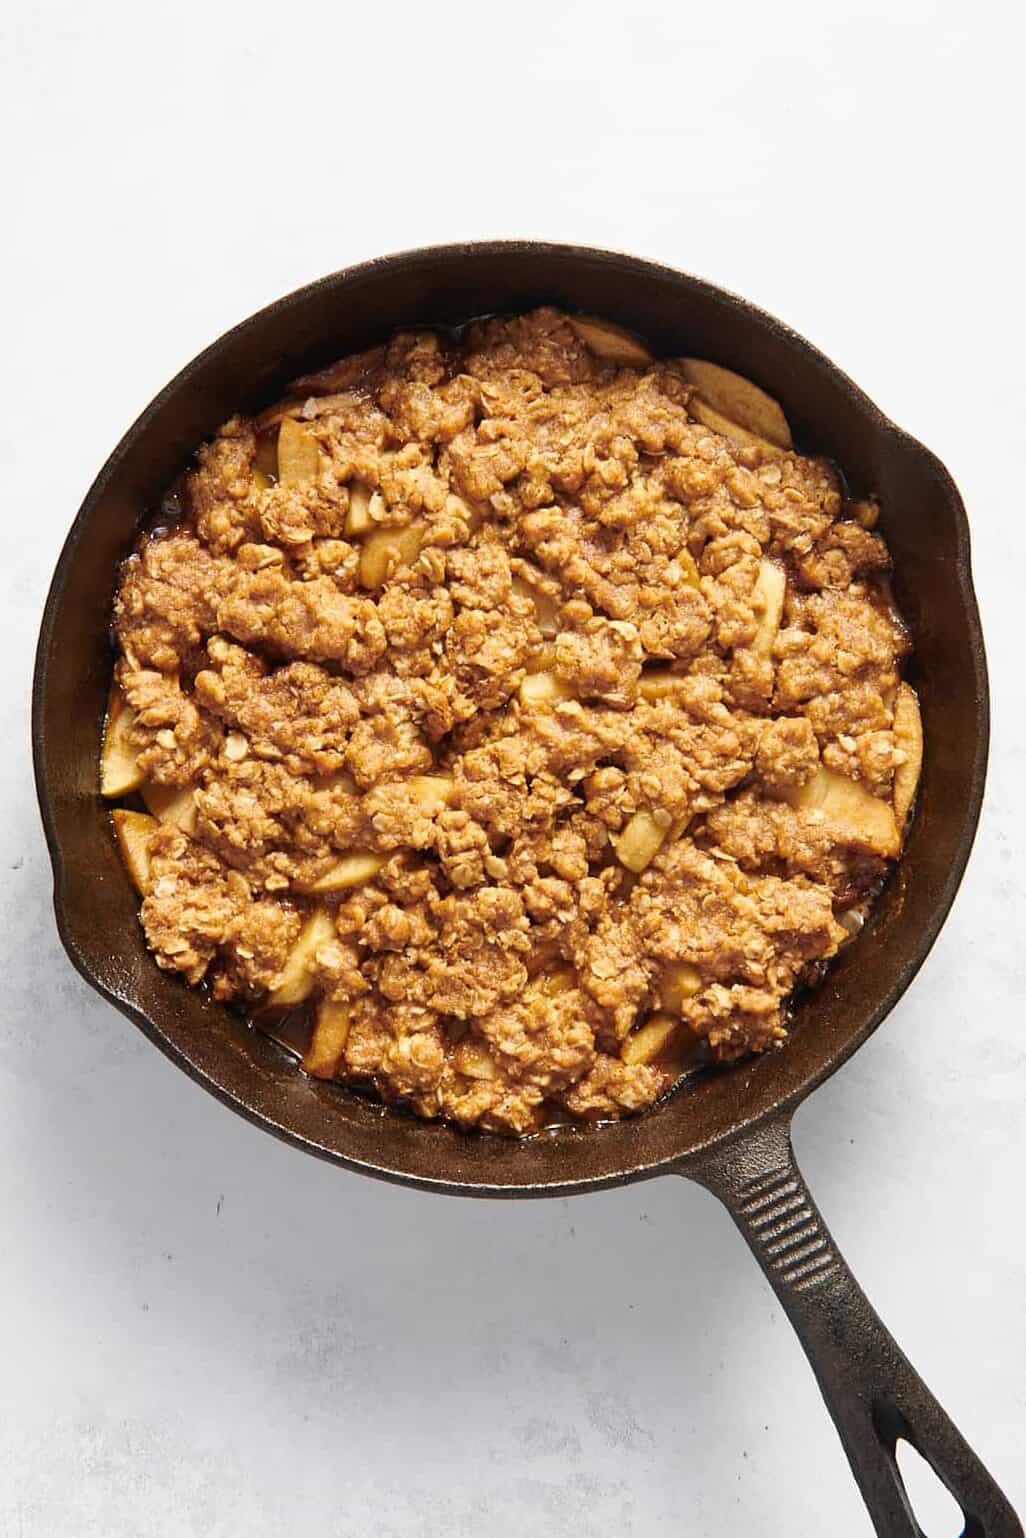 sliced apples dressed in cinnamon and nutmeg poured into a cast iron skillet topped with a crumble mixture